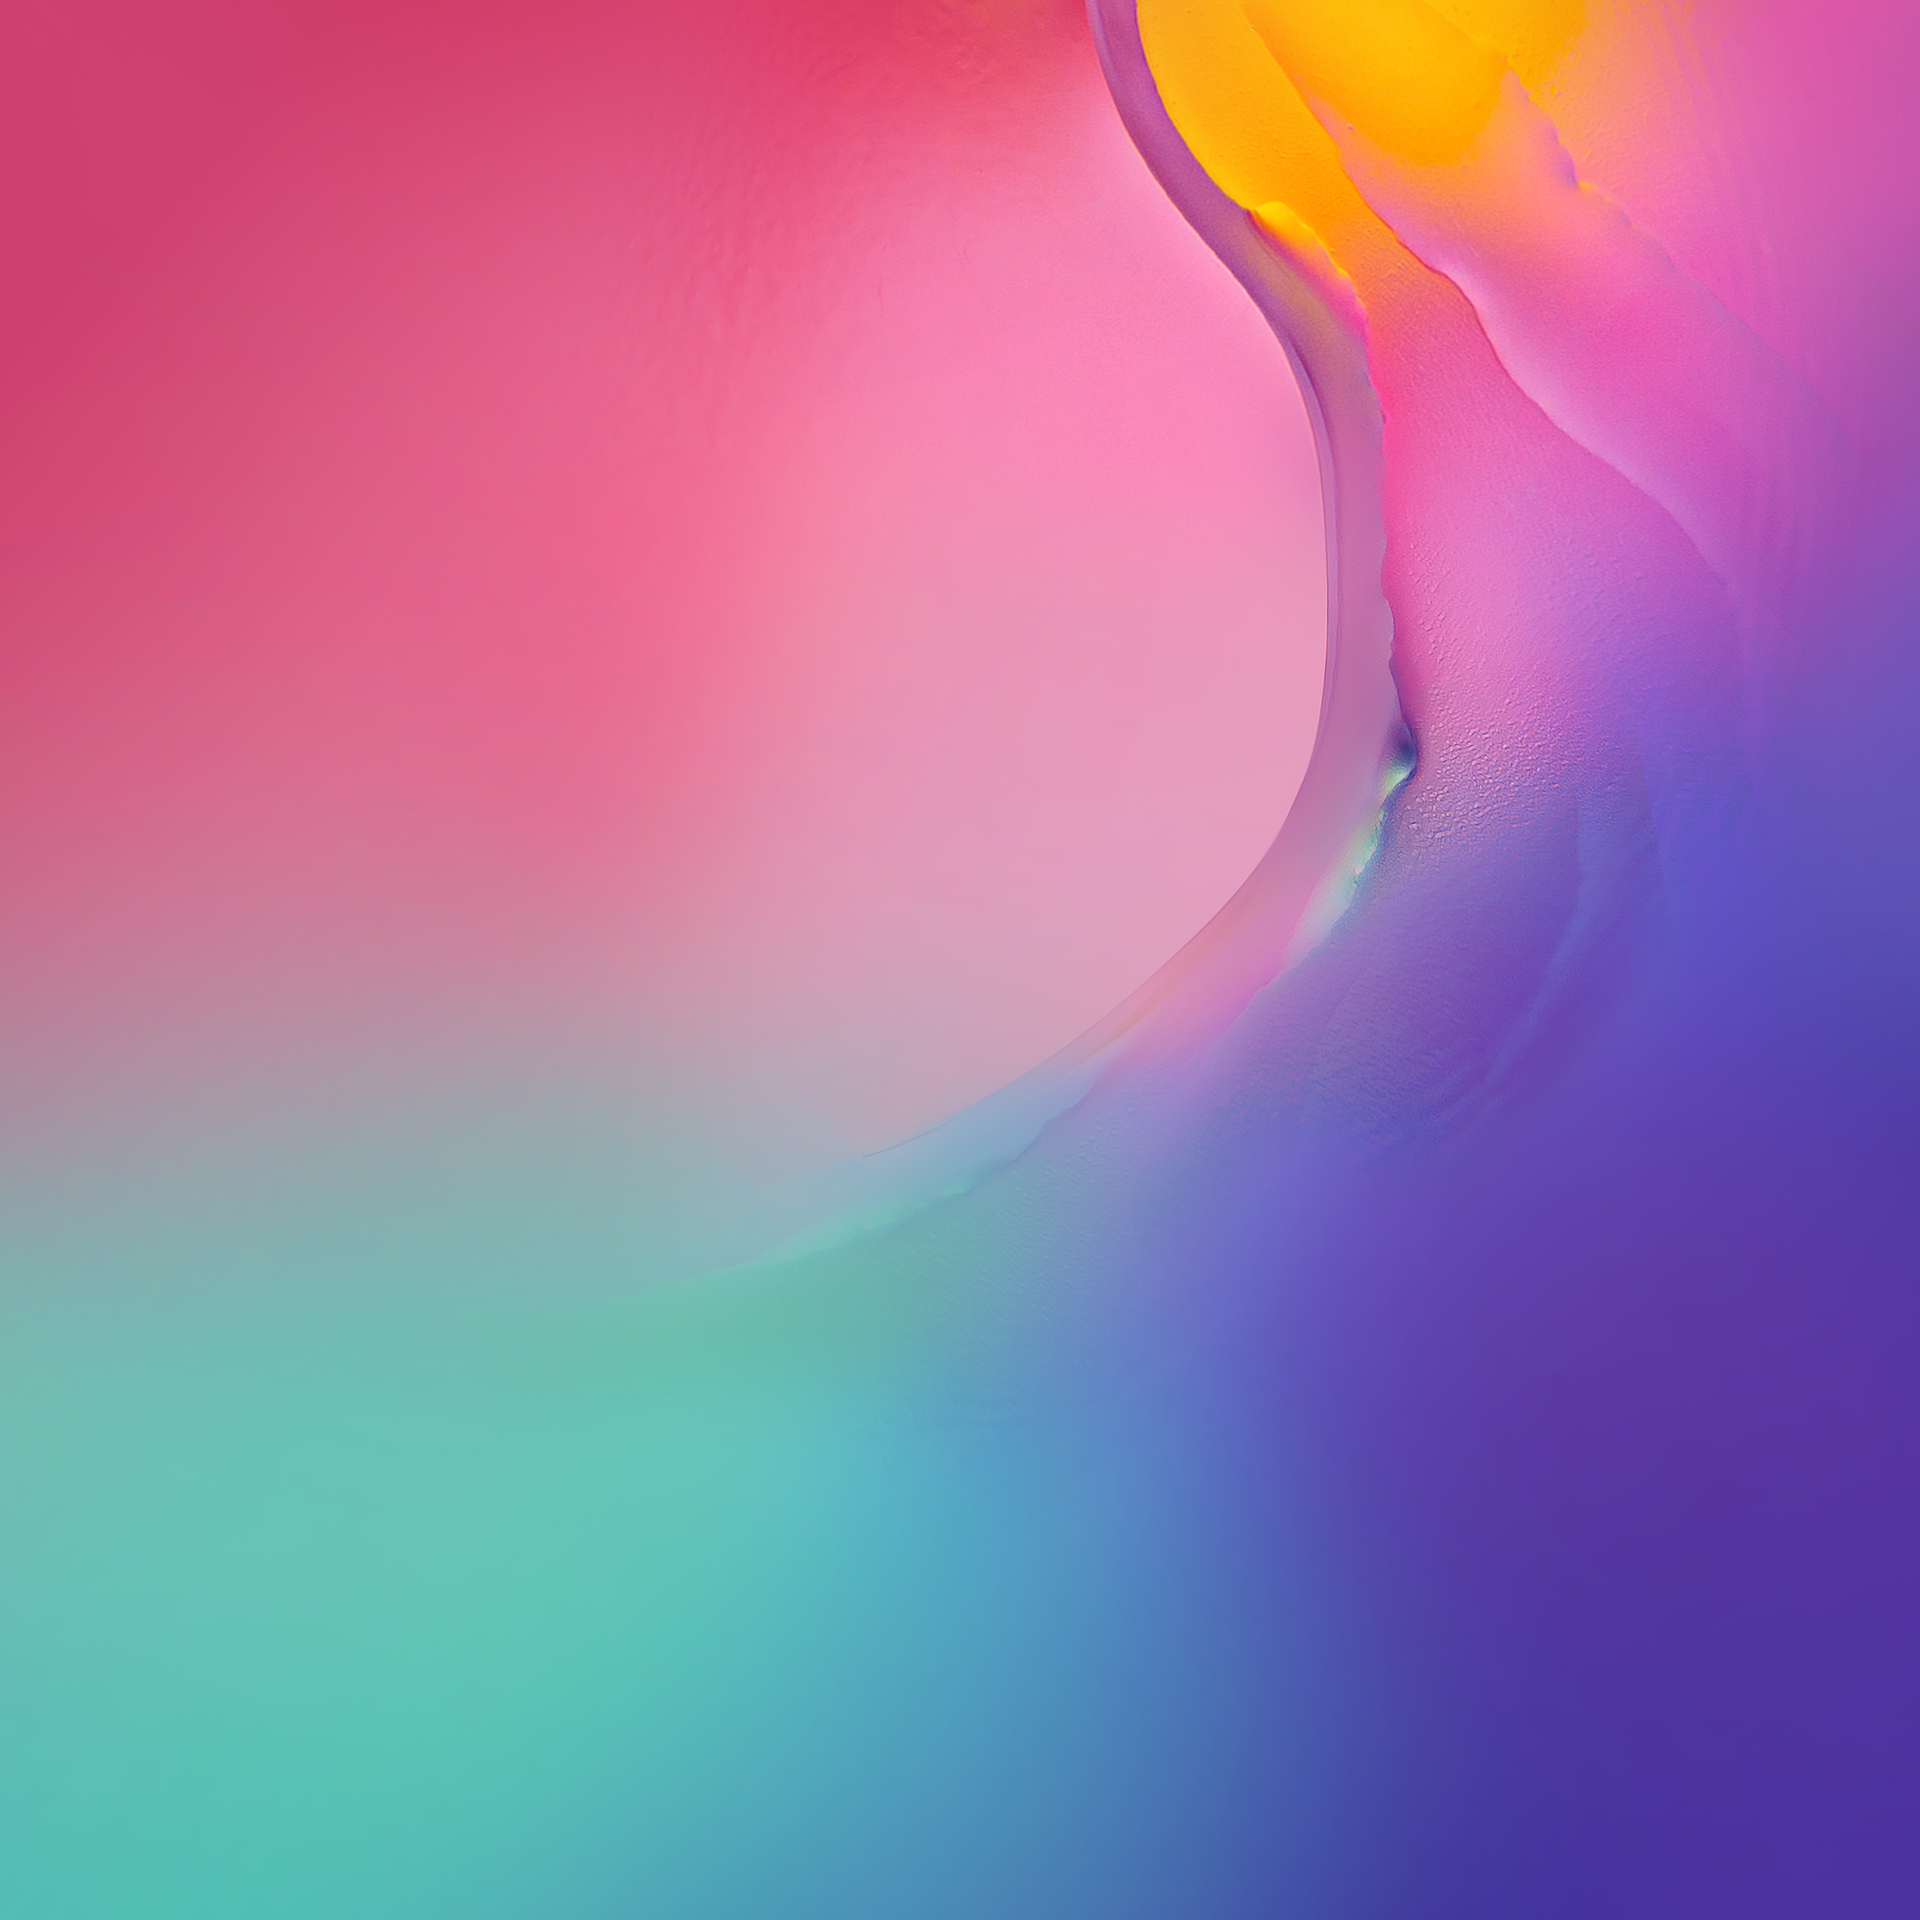 Download Samsung Galaxy Tab S6 wallpapers here  SamMobile